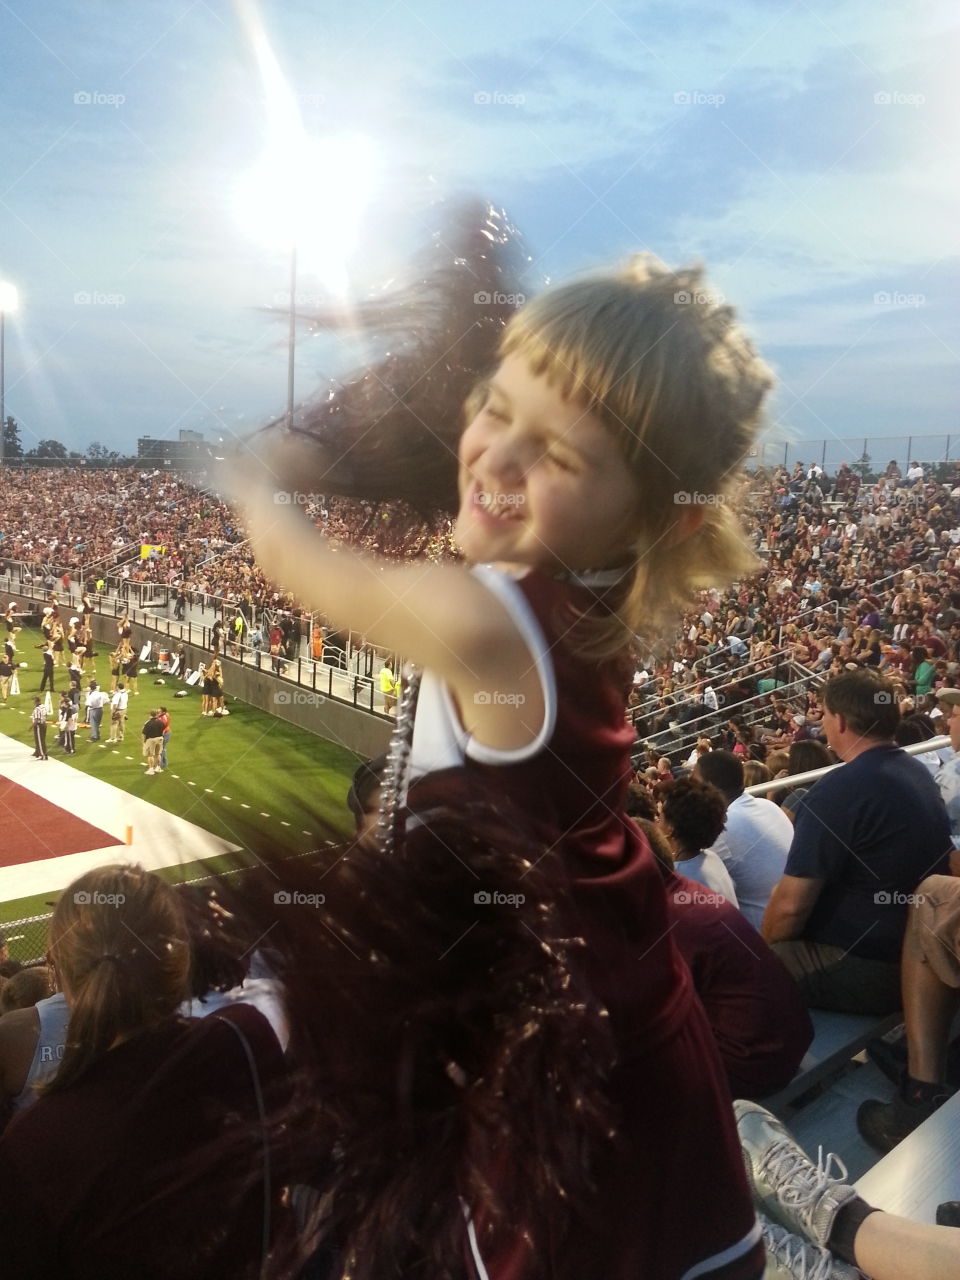 Game Time. My daughter's first college football game having a blast cheering for our team.